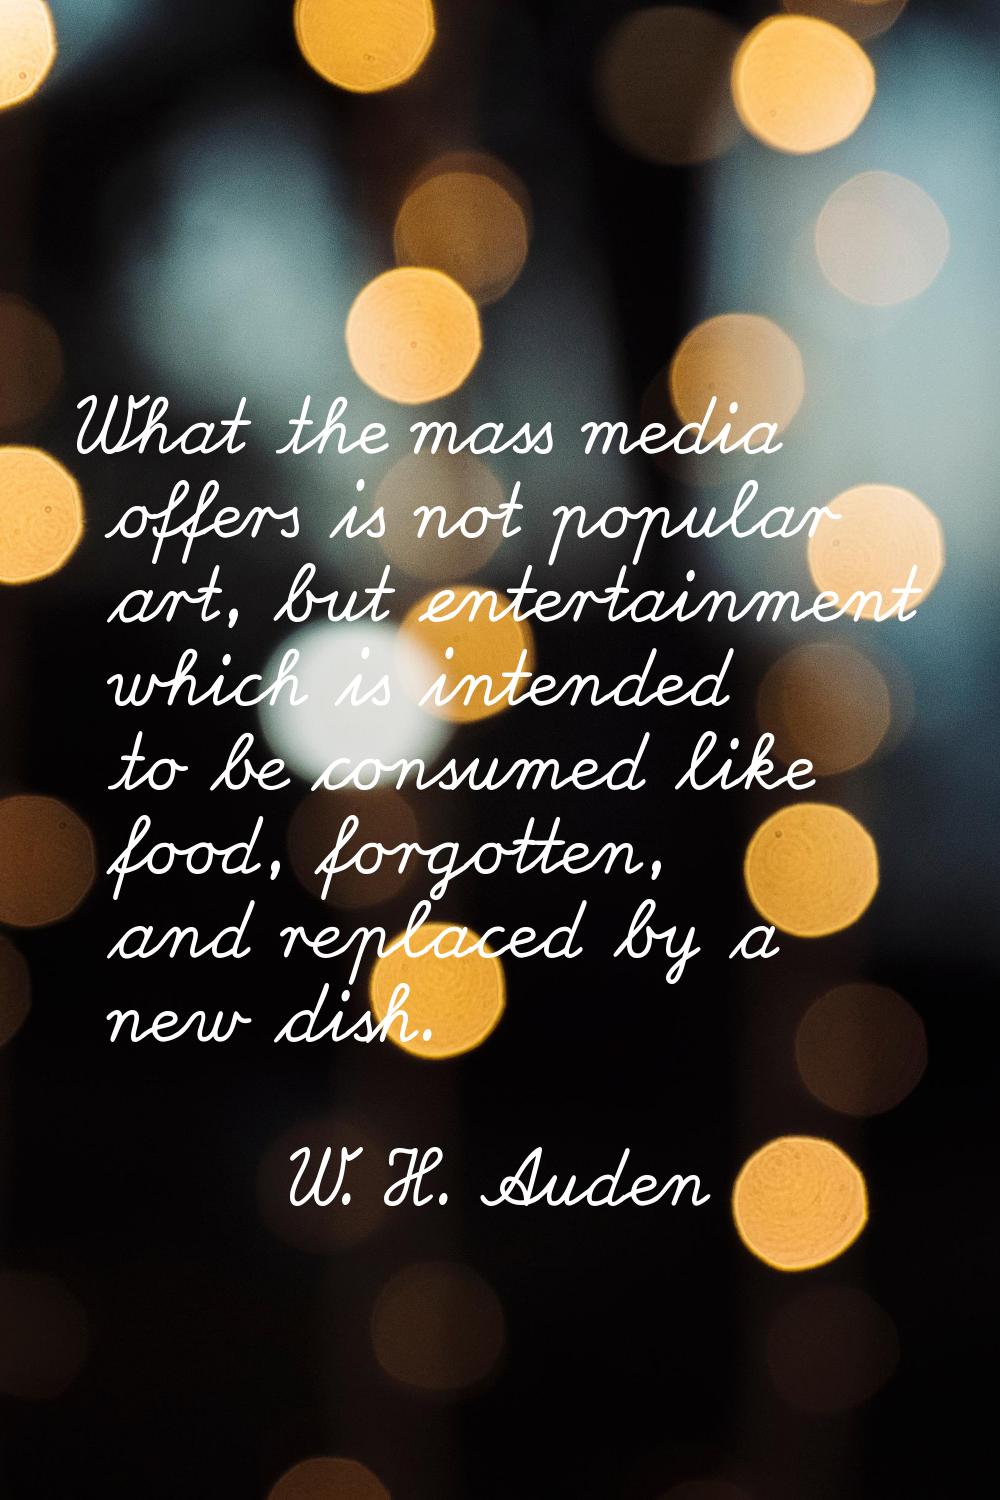 What the mass media offers is not popular art, but entertainment which is intended to be consumed l